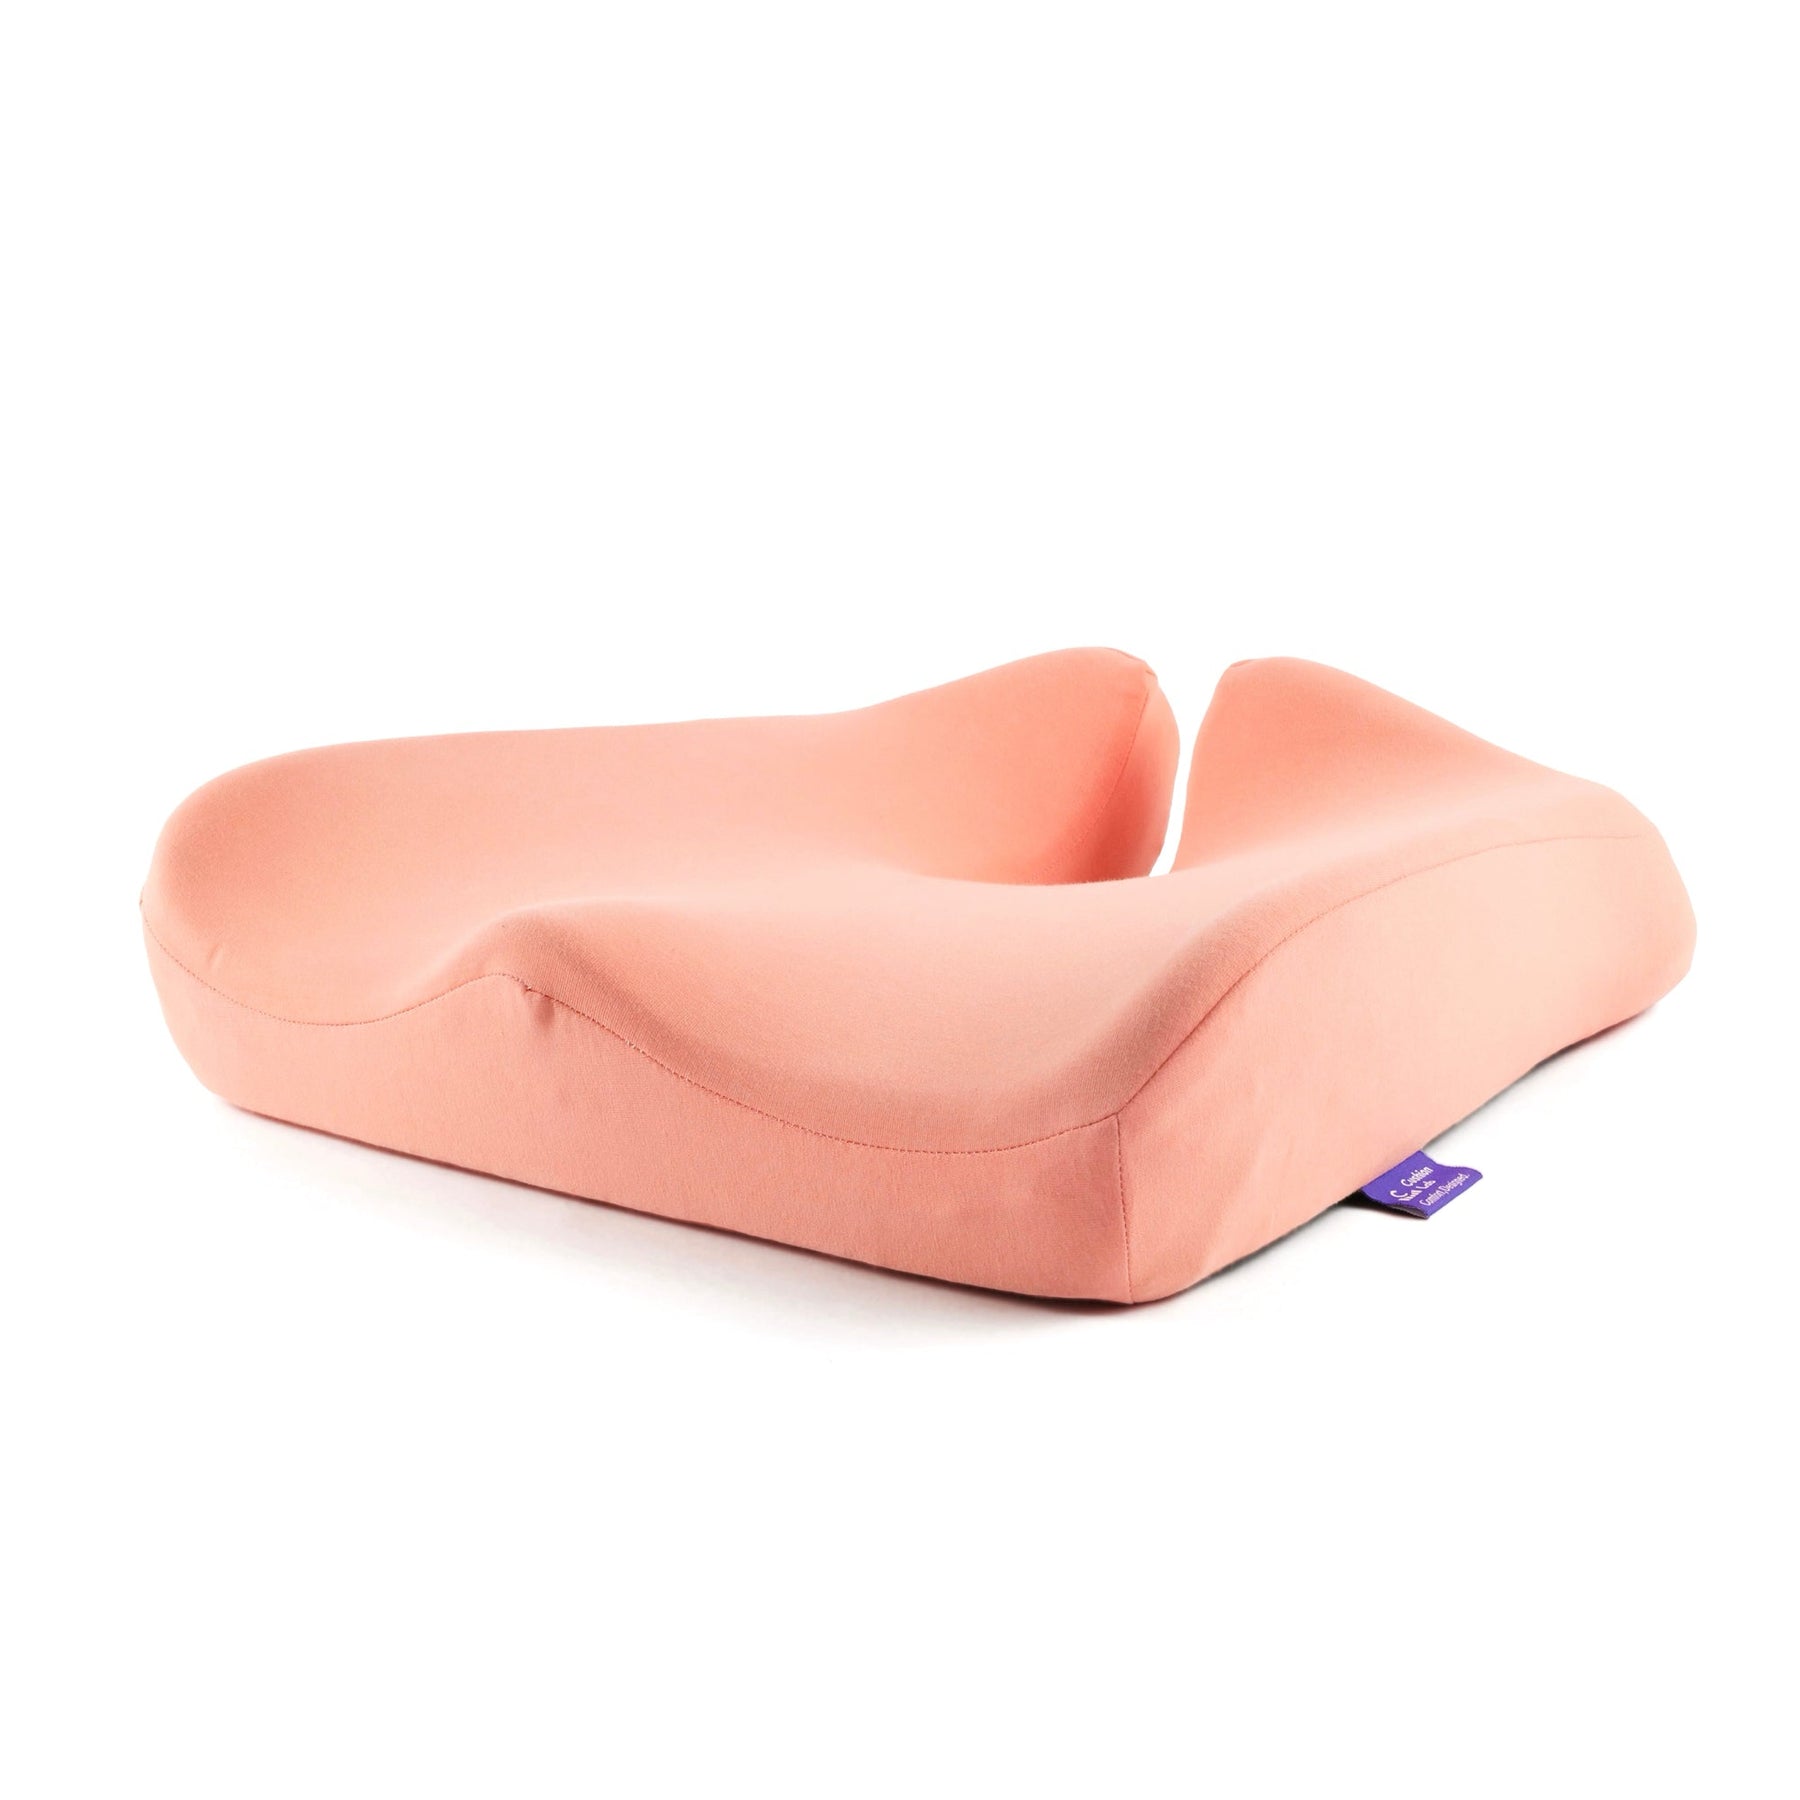 (⭐⭐ HOT SALE NOW) Pressure Relief Seat Cushion